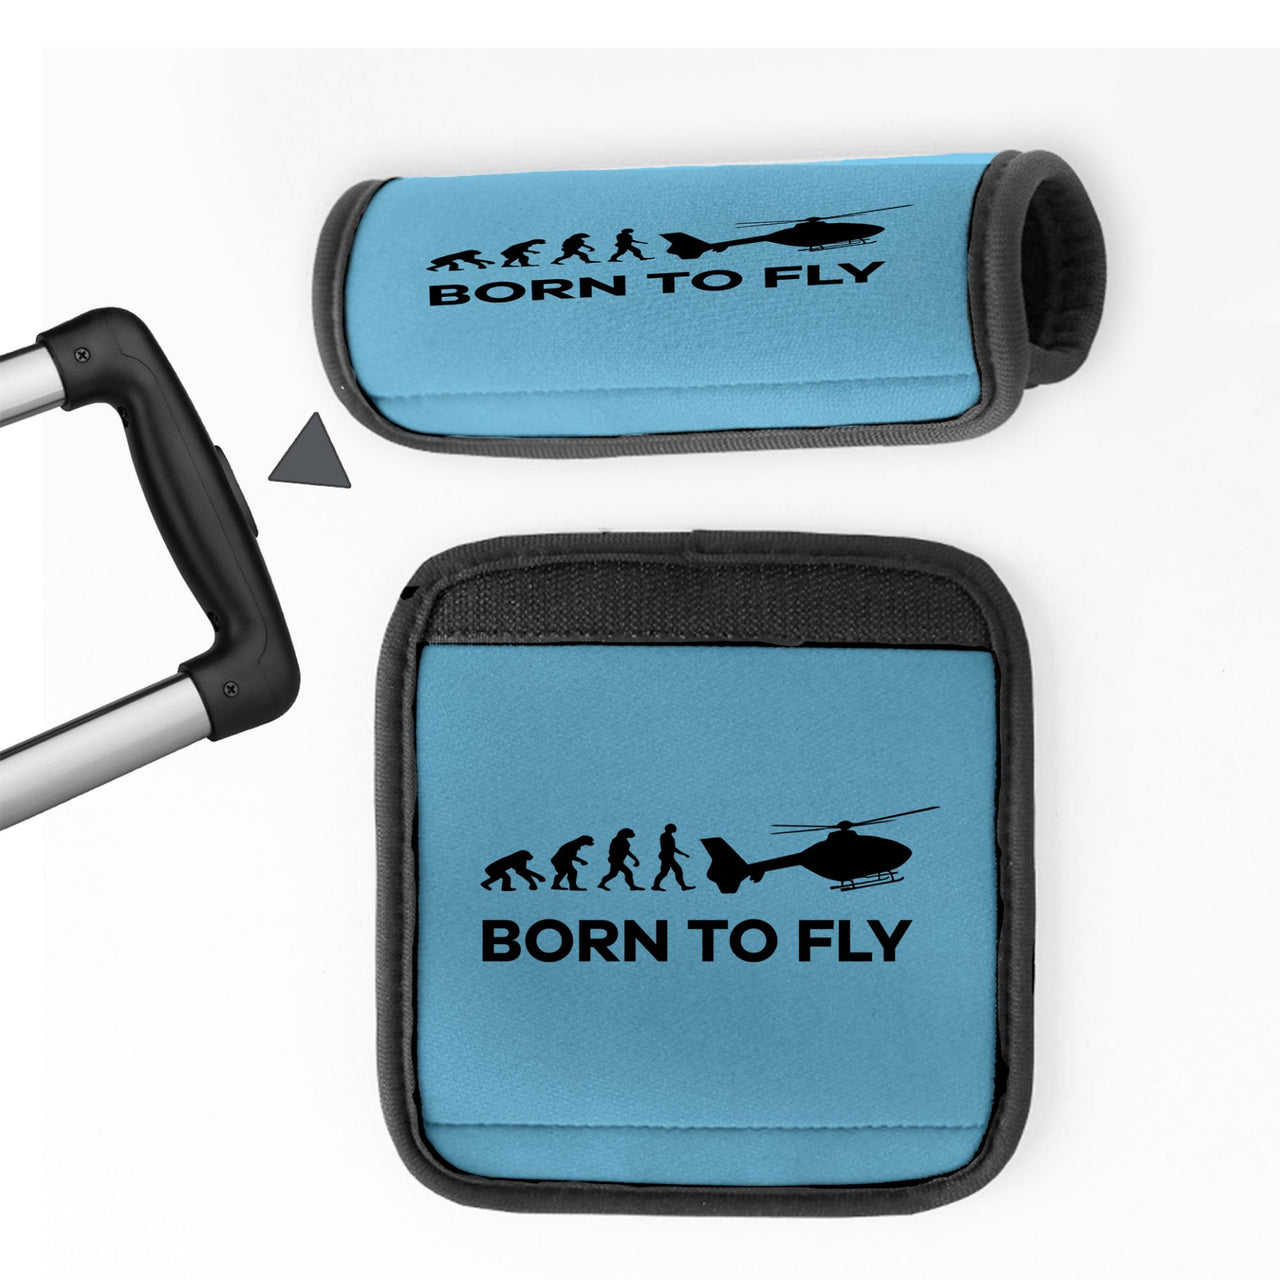 Born To Fly Helicopter Designed Neoprene Luggage Handle Covers